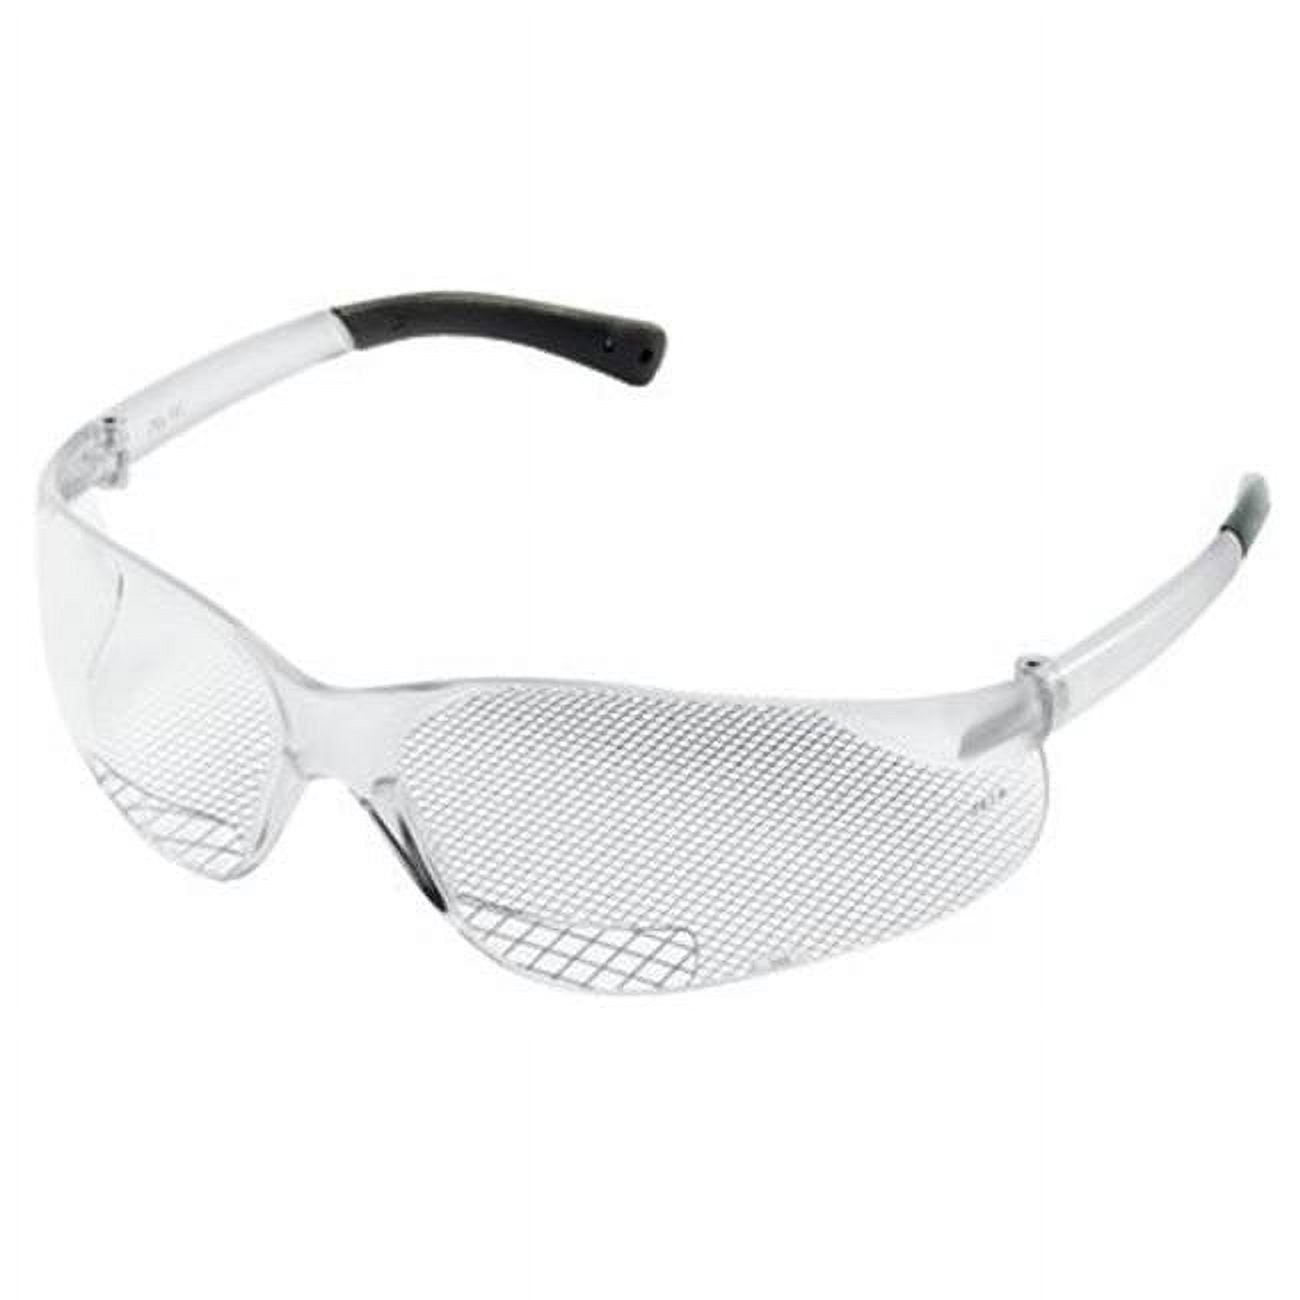 Mcr Safety Bkh20 2 0 Strength Bearkat Magnifiers Safety Glasses Clear Lens